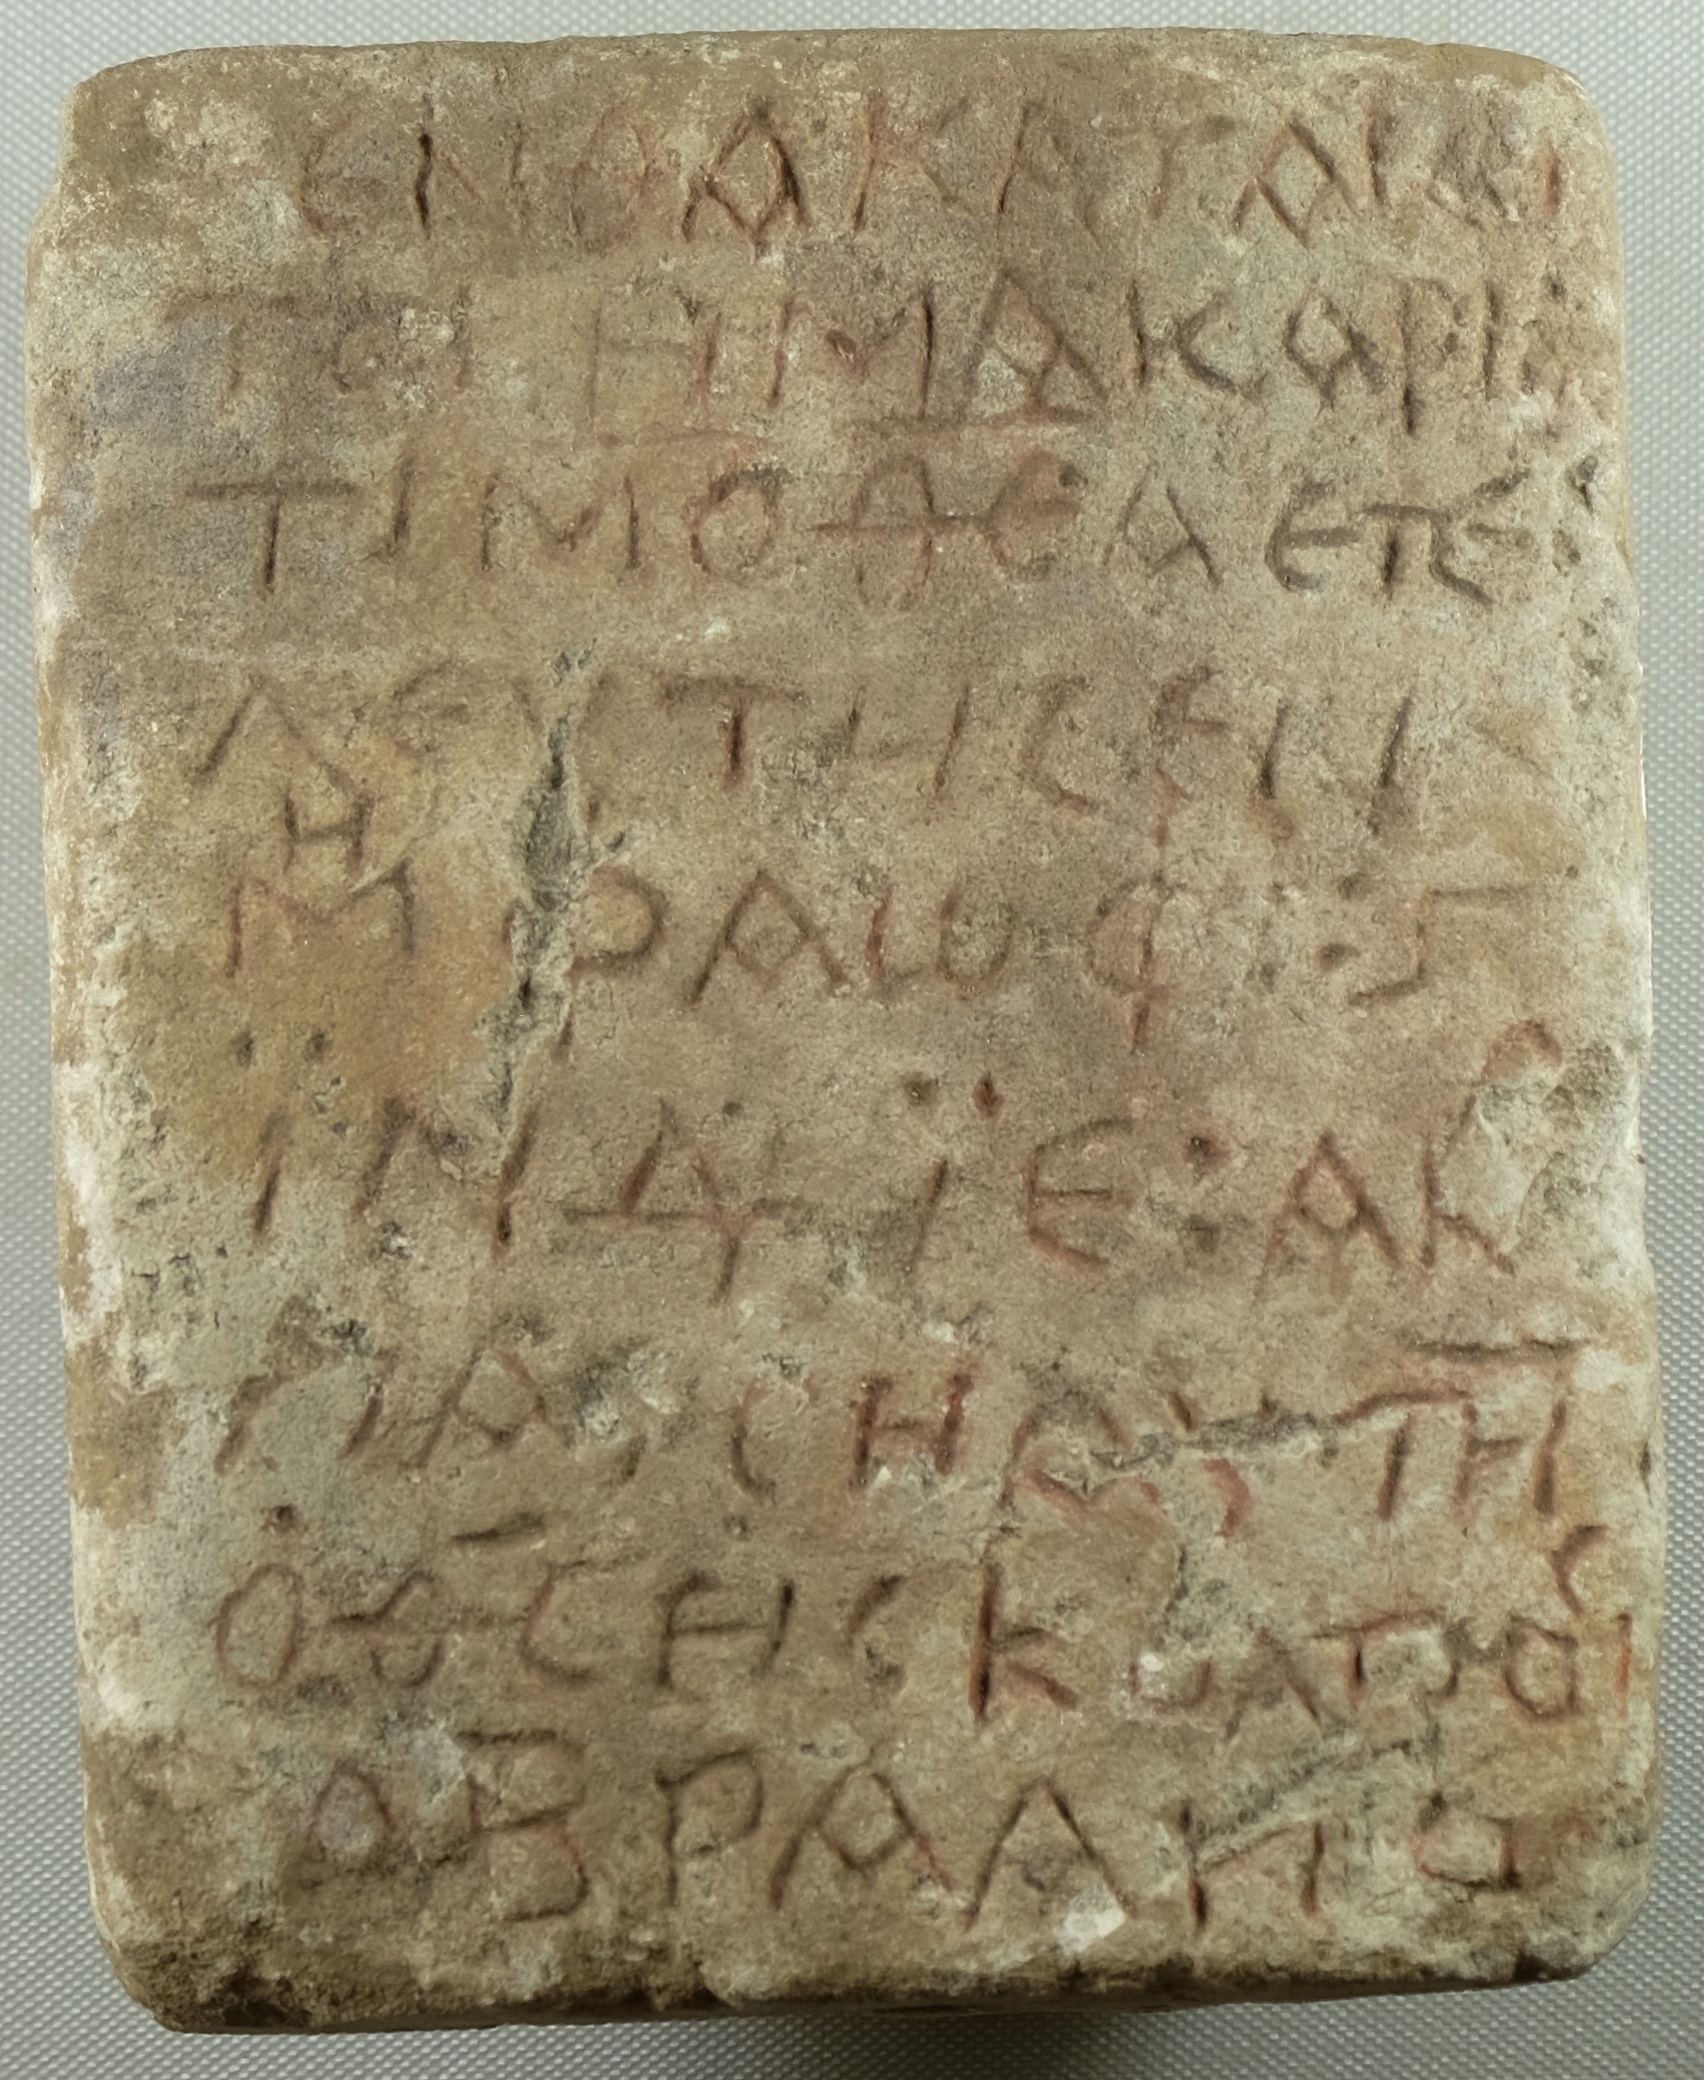 Epitaph of Timothea. Brooklyn Museum accession 37.1827E; ex-New-York Historical Society O.127An. Photography: the author.